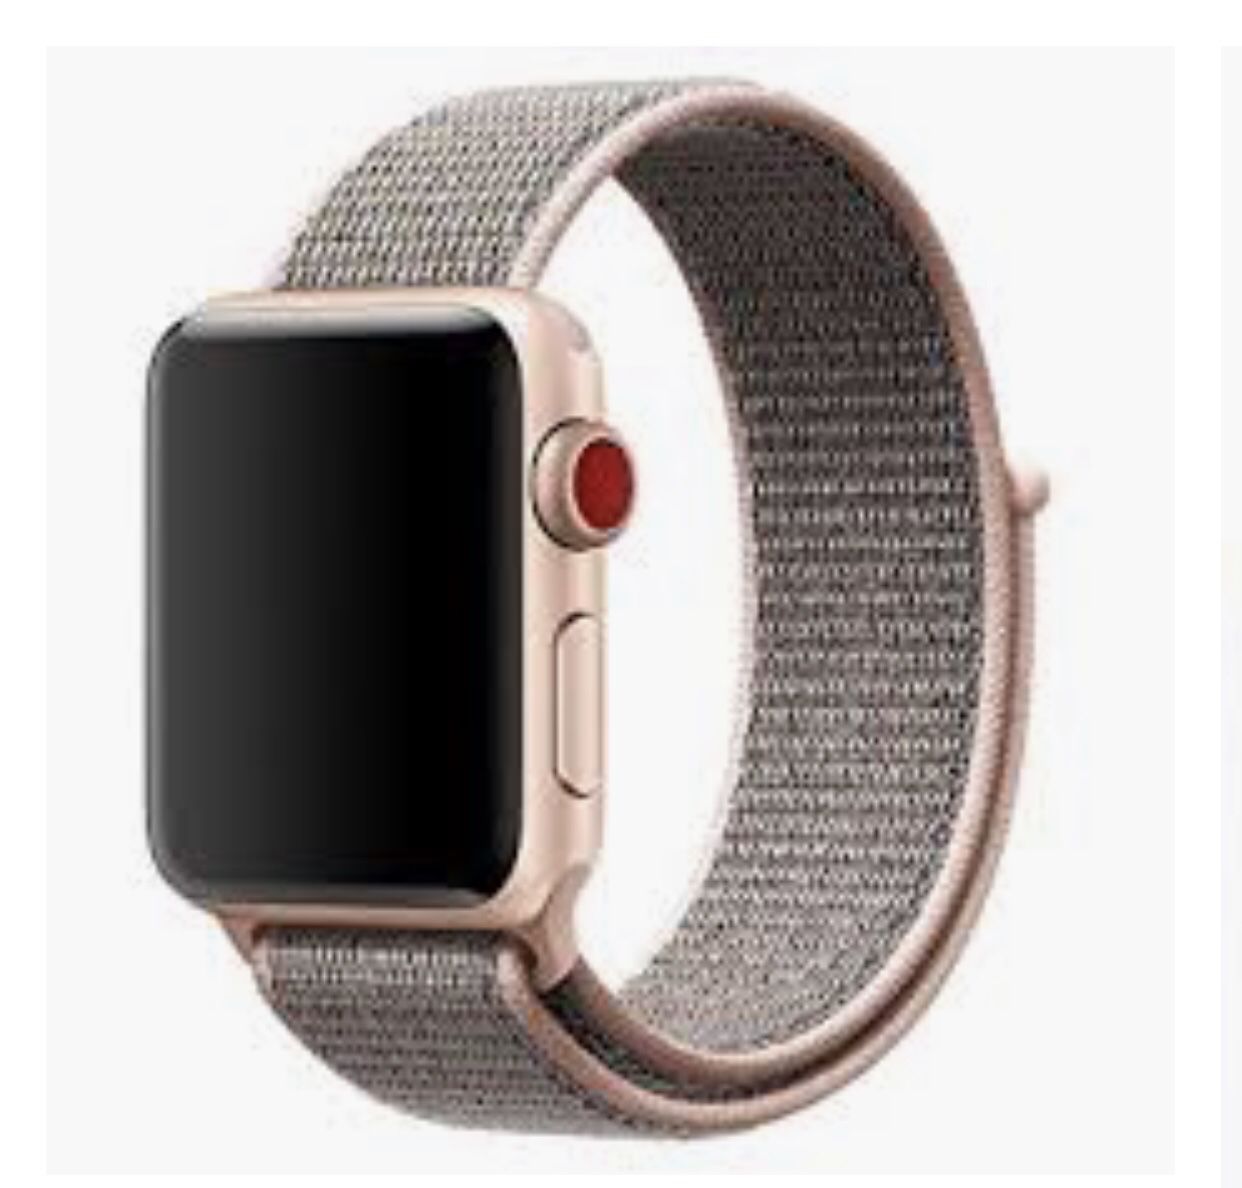 Apple Watch series 3 w/ gps+cellular, charger and box included. rose gold Nylon band (as shown in pic)